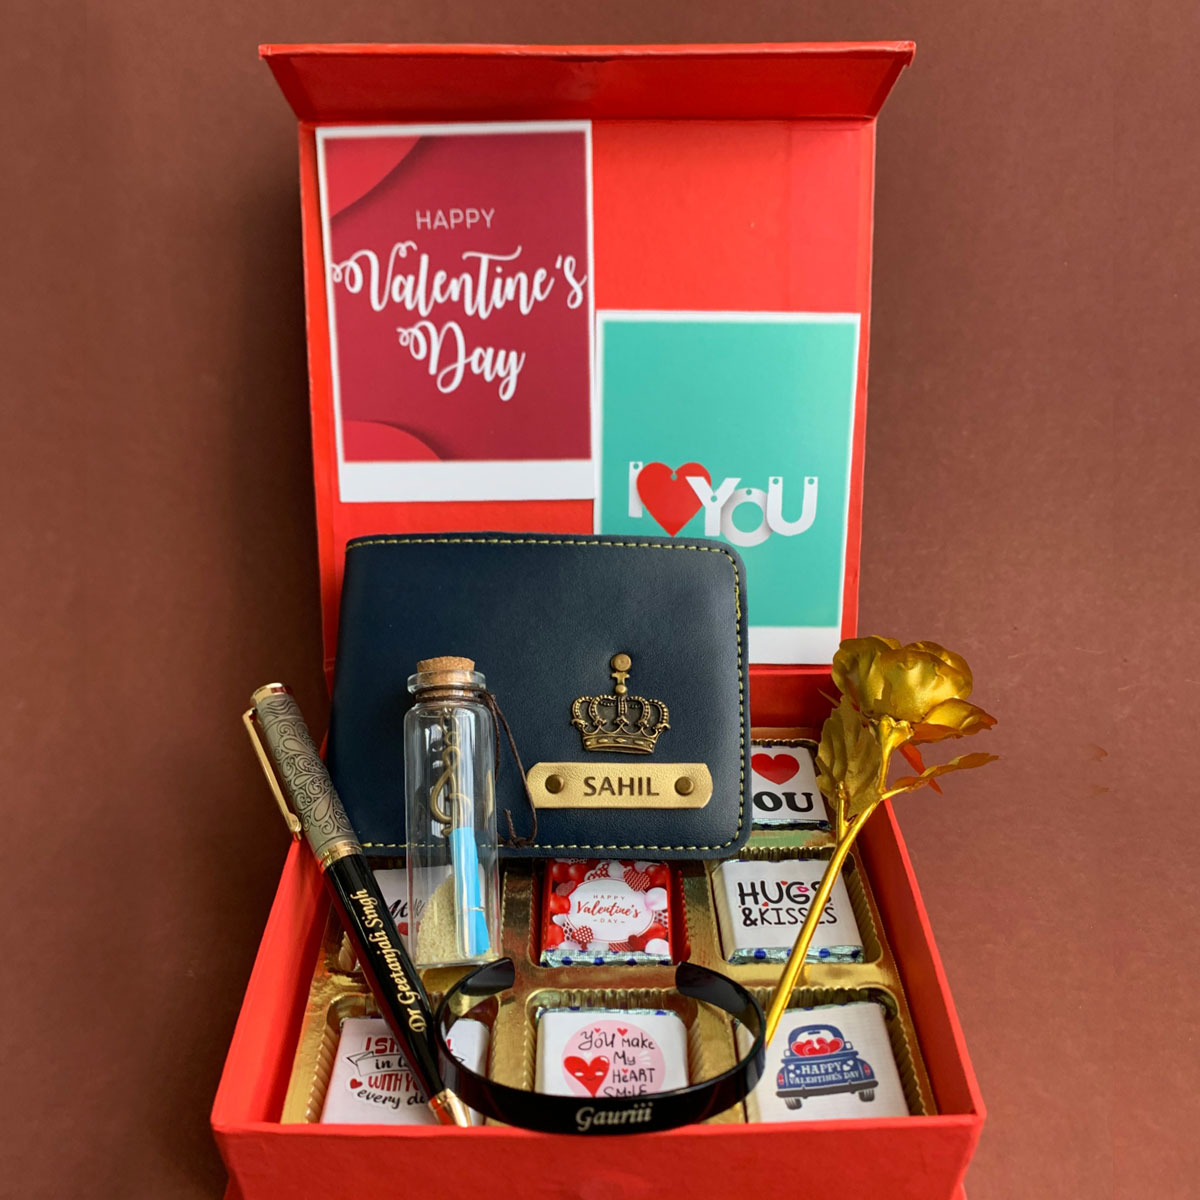 14 Best Valentine's Day Gifts for Husband